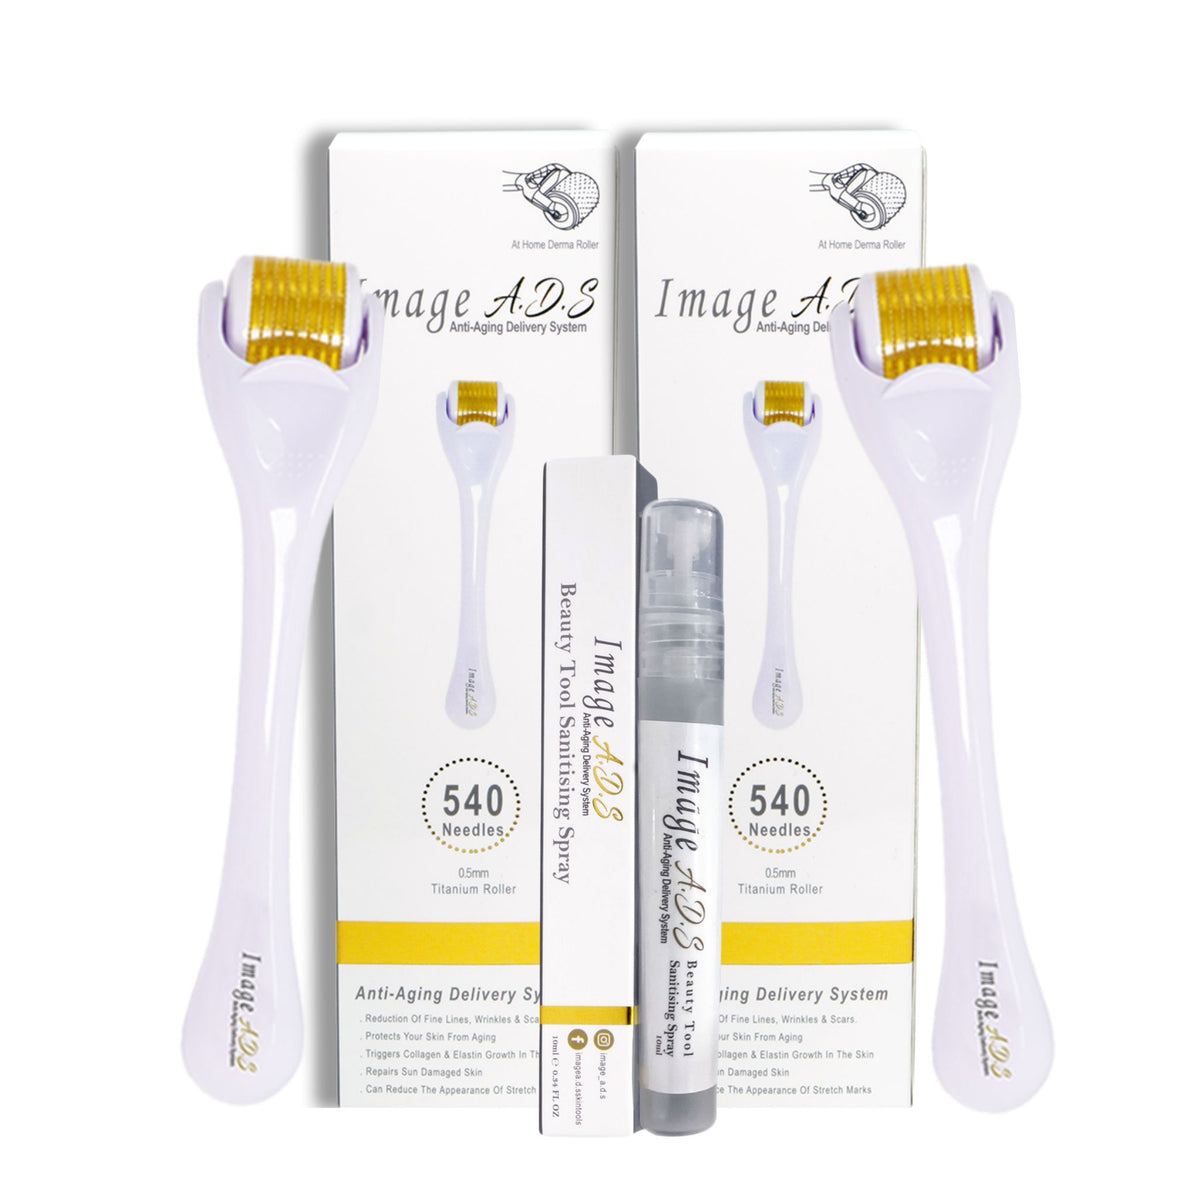 The Perfect Couple - Buy 1 Get 1 FREE Image A.D.S Dermaroller 0.5mm + Free Beauty Tool Sanitizing Spray